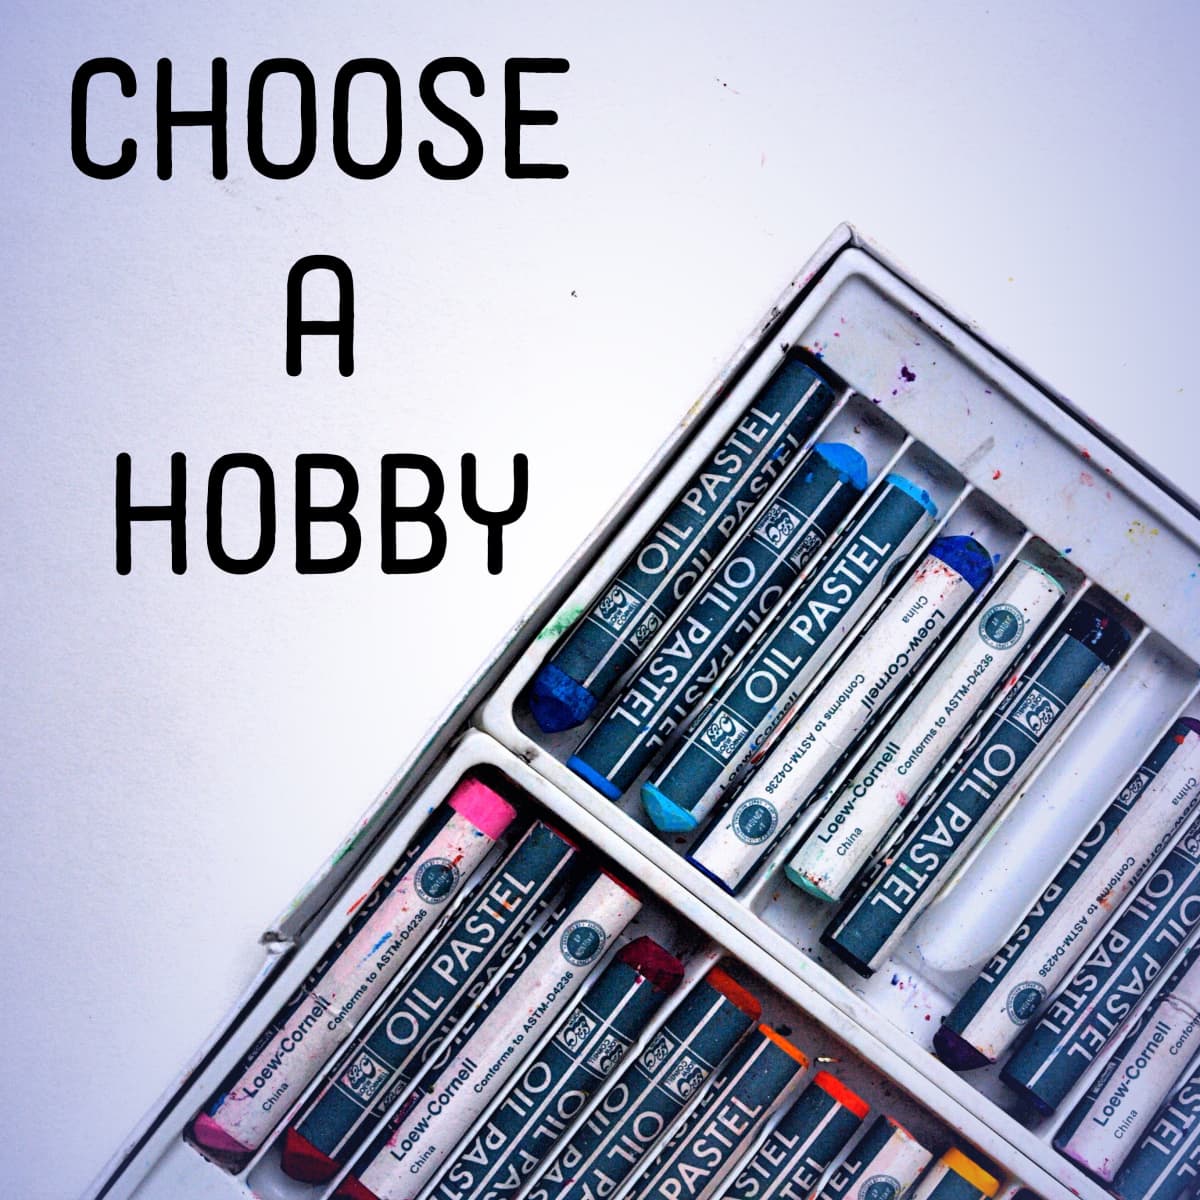 150+ Hobby Ideas Broken Down by Interest and Personality - HobbyLark